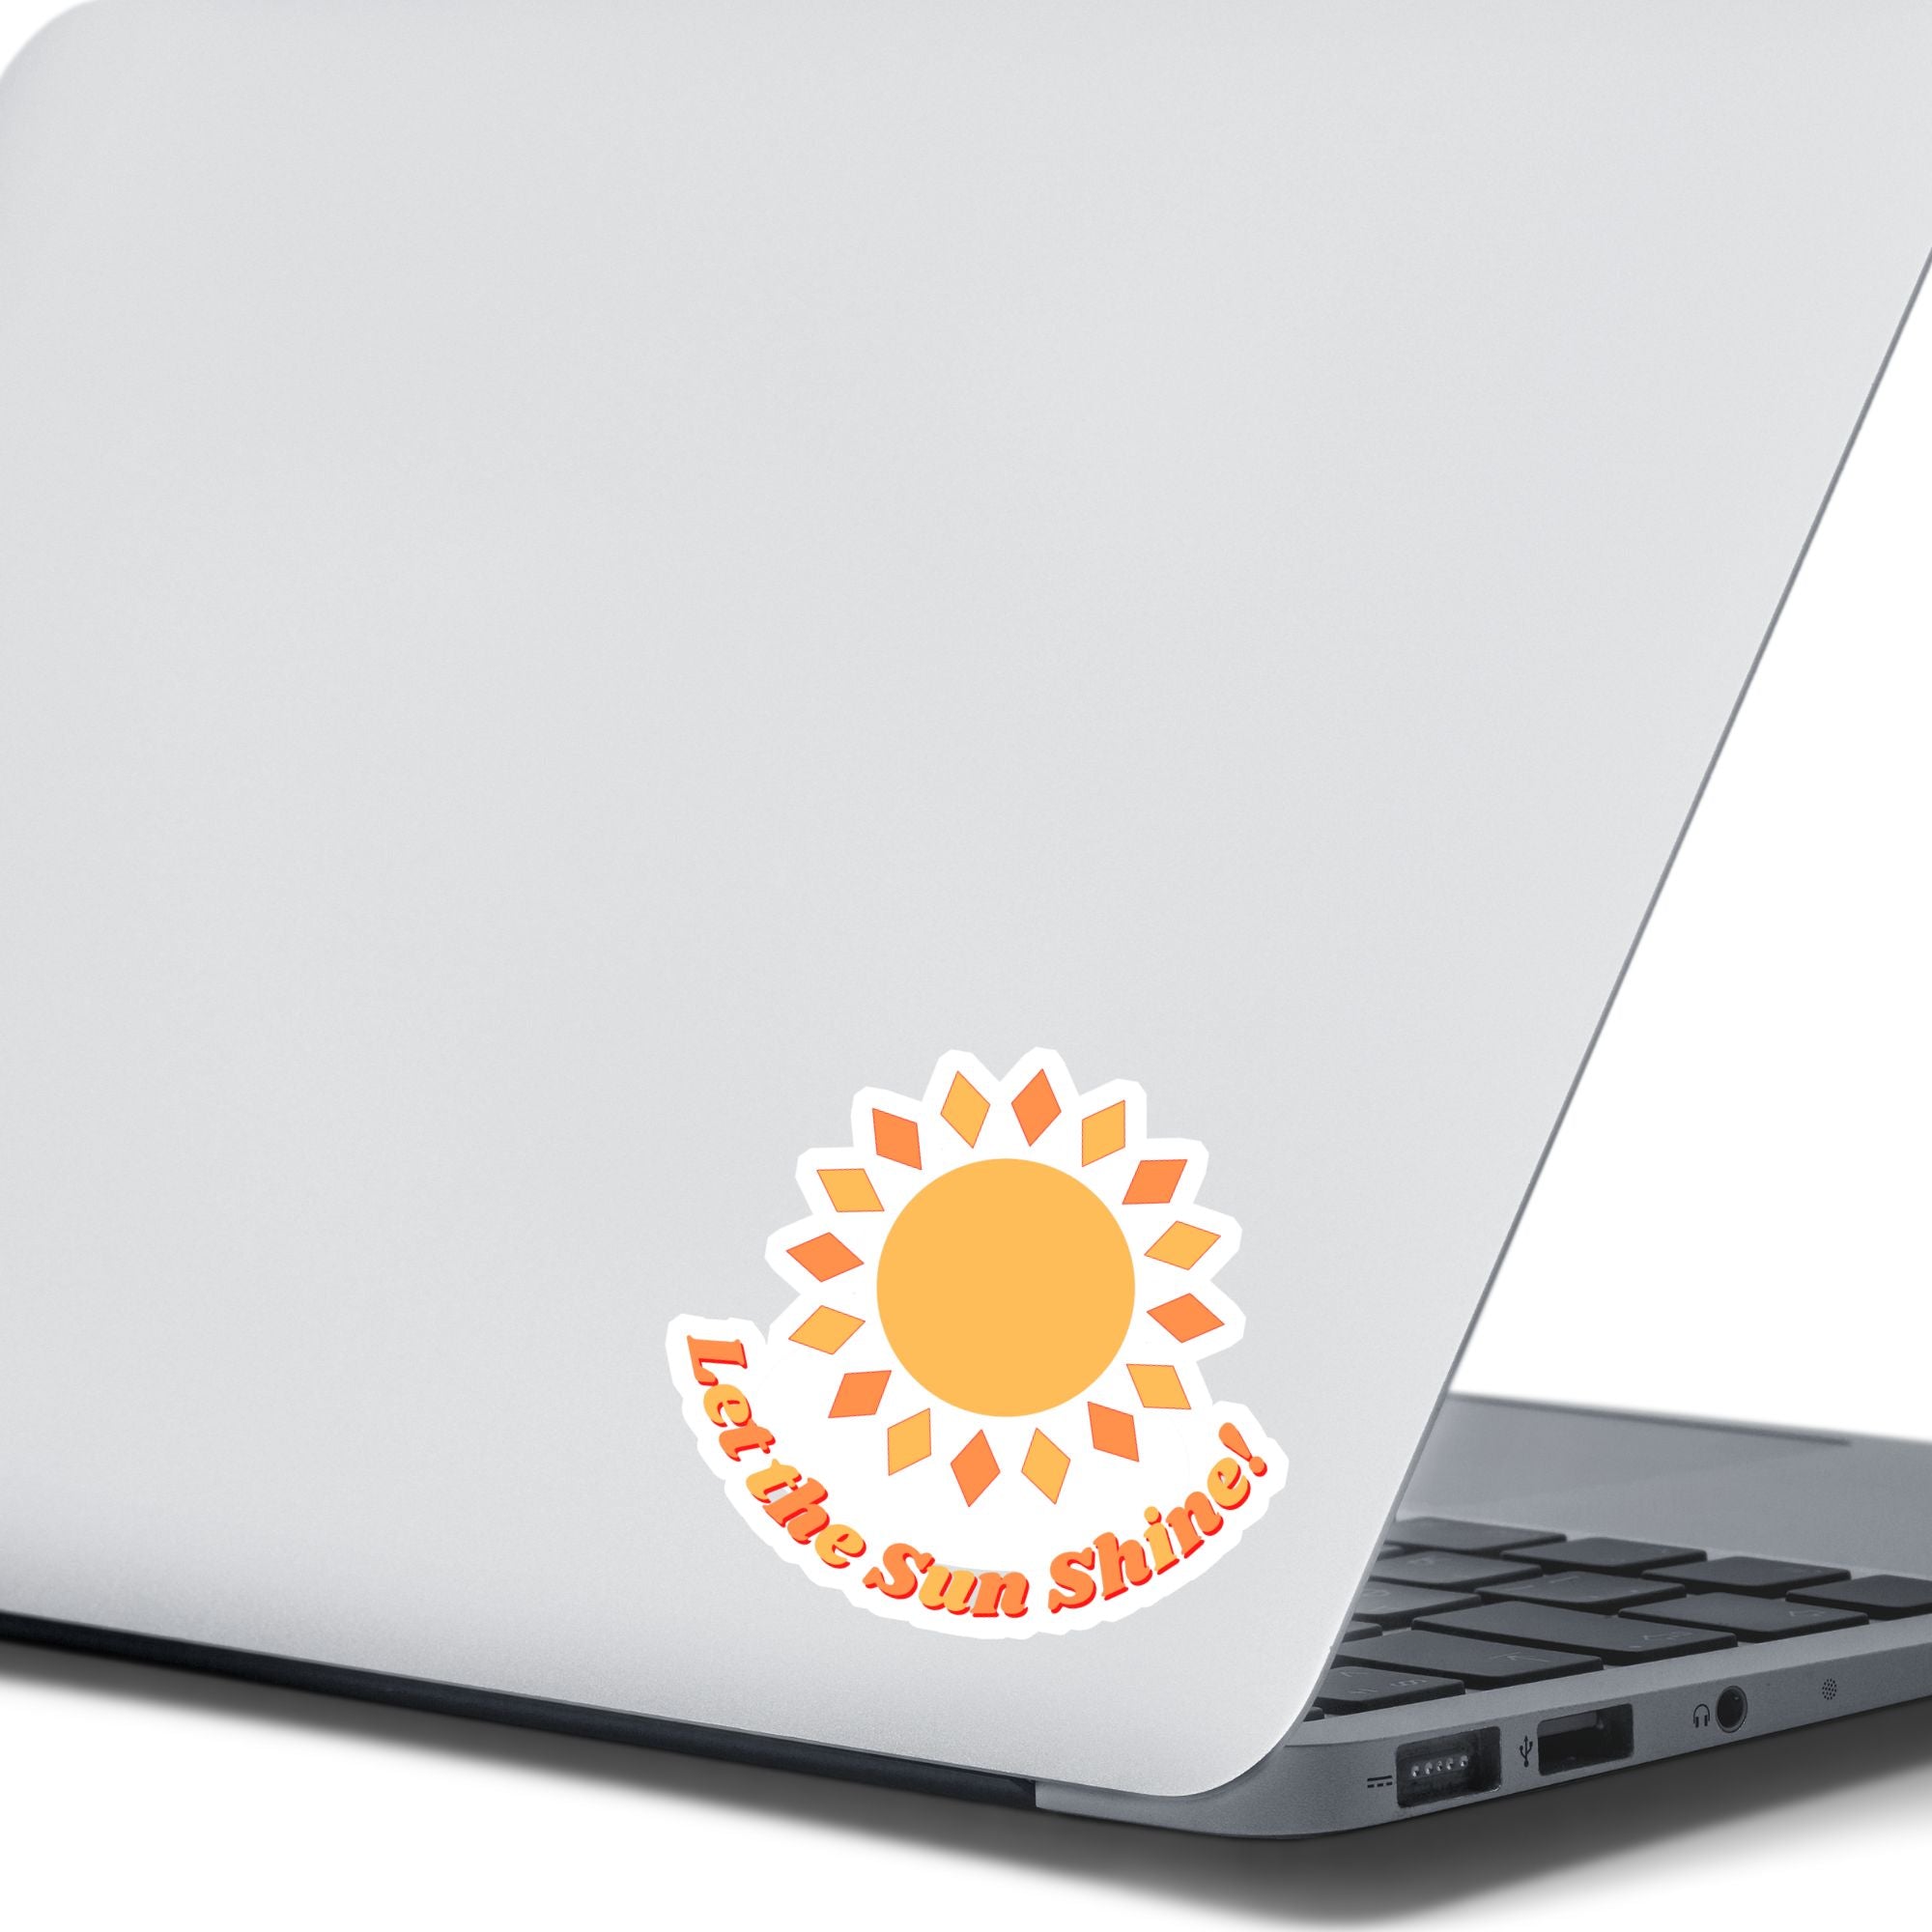 Let the Sun Shine! This bright and fun individual die-cut sticker features a yellow and orange sun with the words "Let the Sun Shine!" below. This image shows the Let the Sun Shine! sticker on the back of an open laptop.